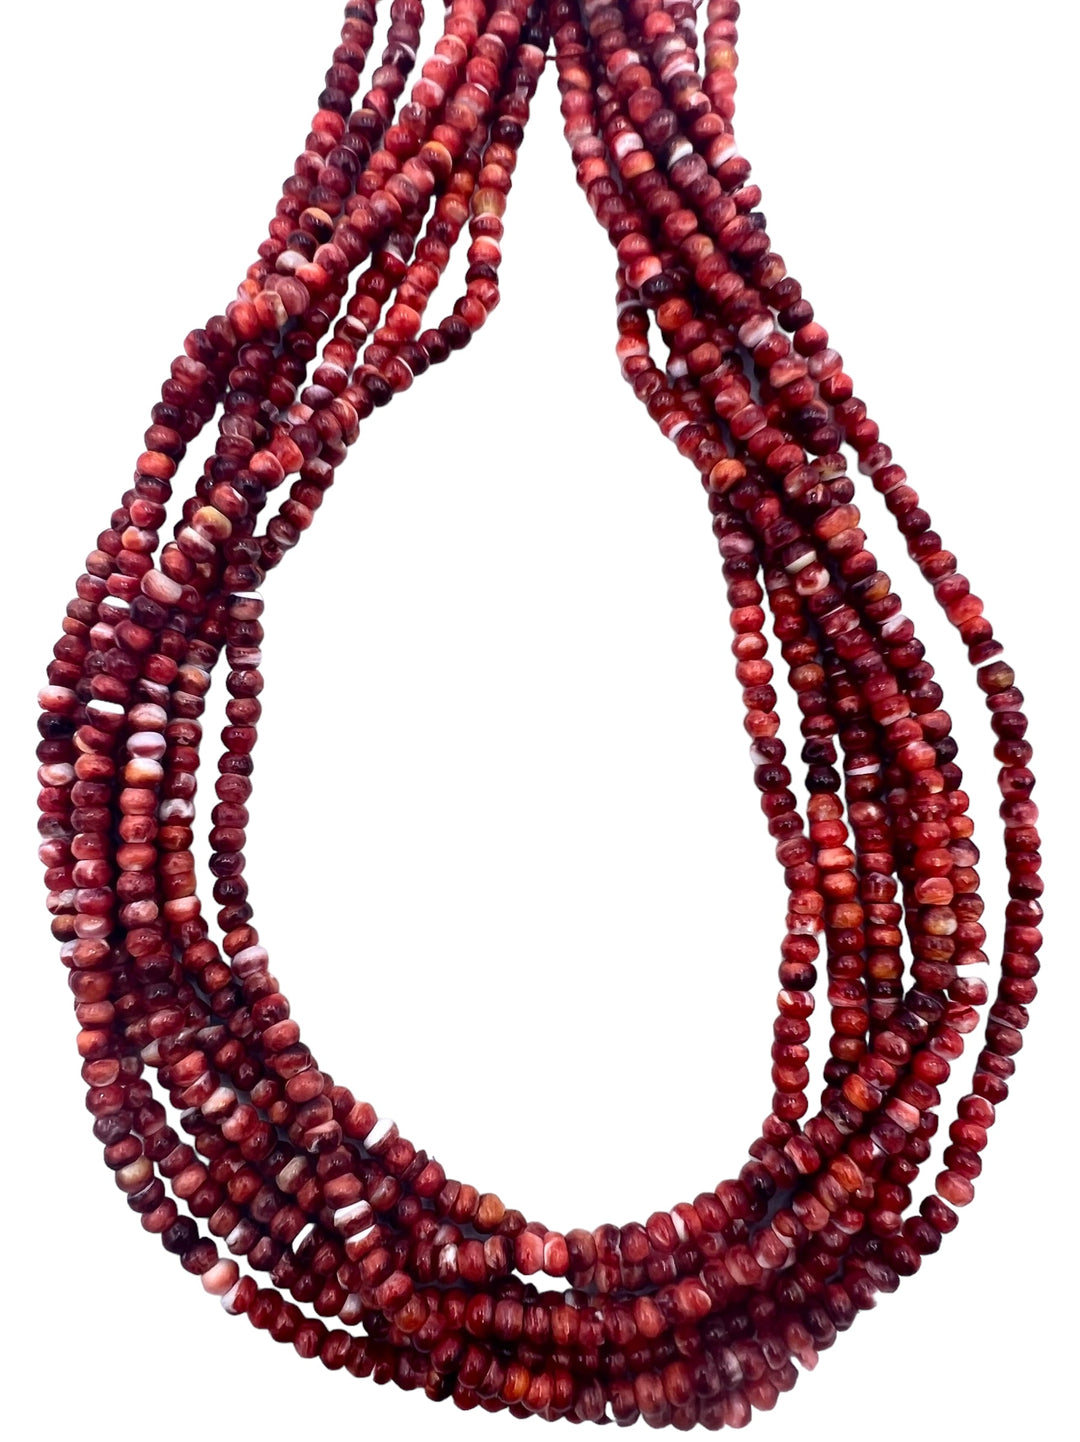 Red/Rust Spiny Oyster 4mm Rondelle Beads (16 Inch Strand)